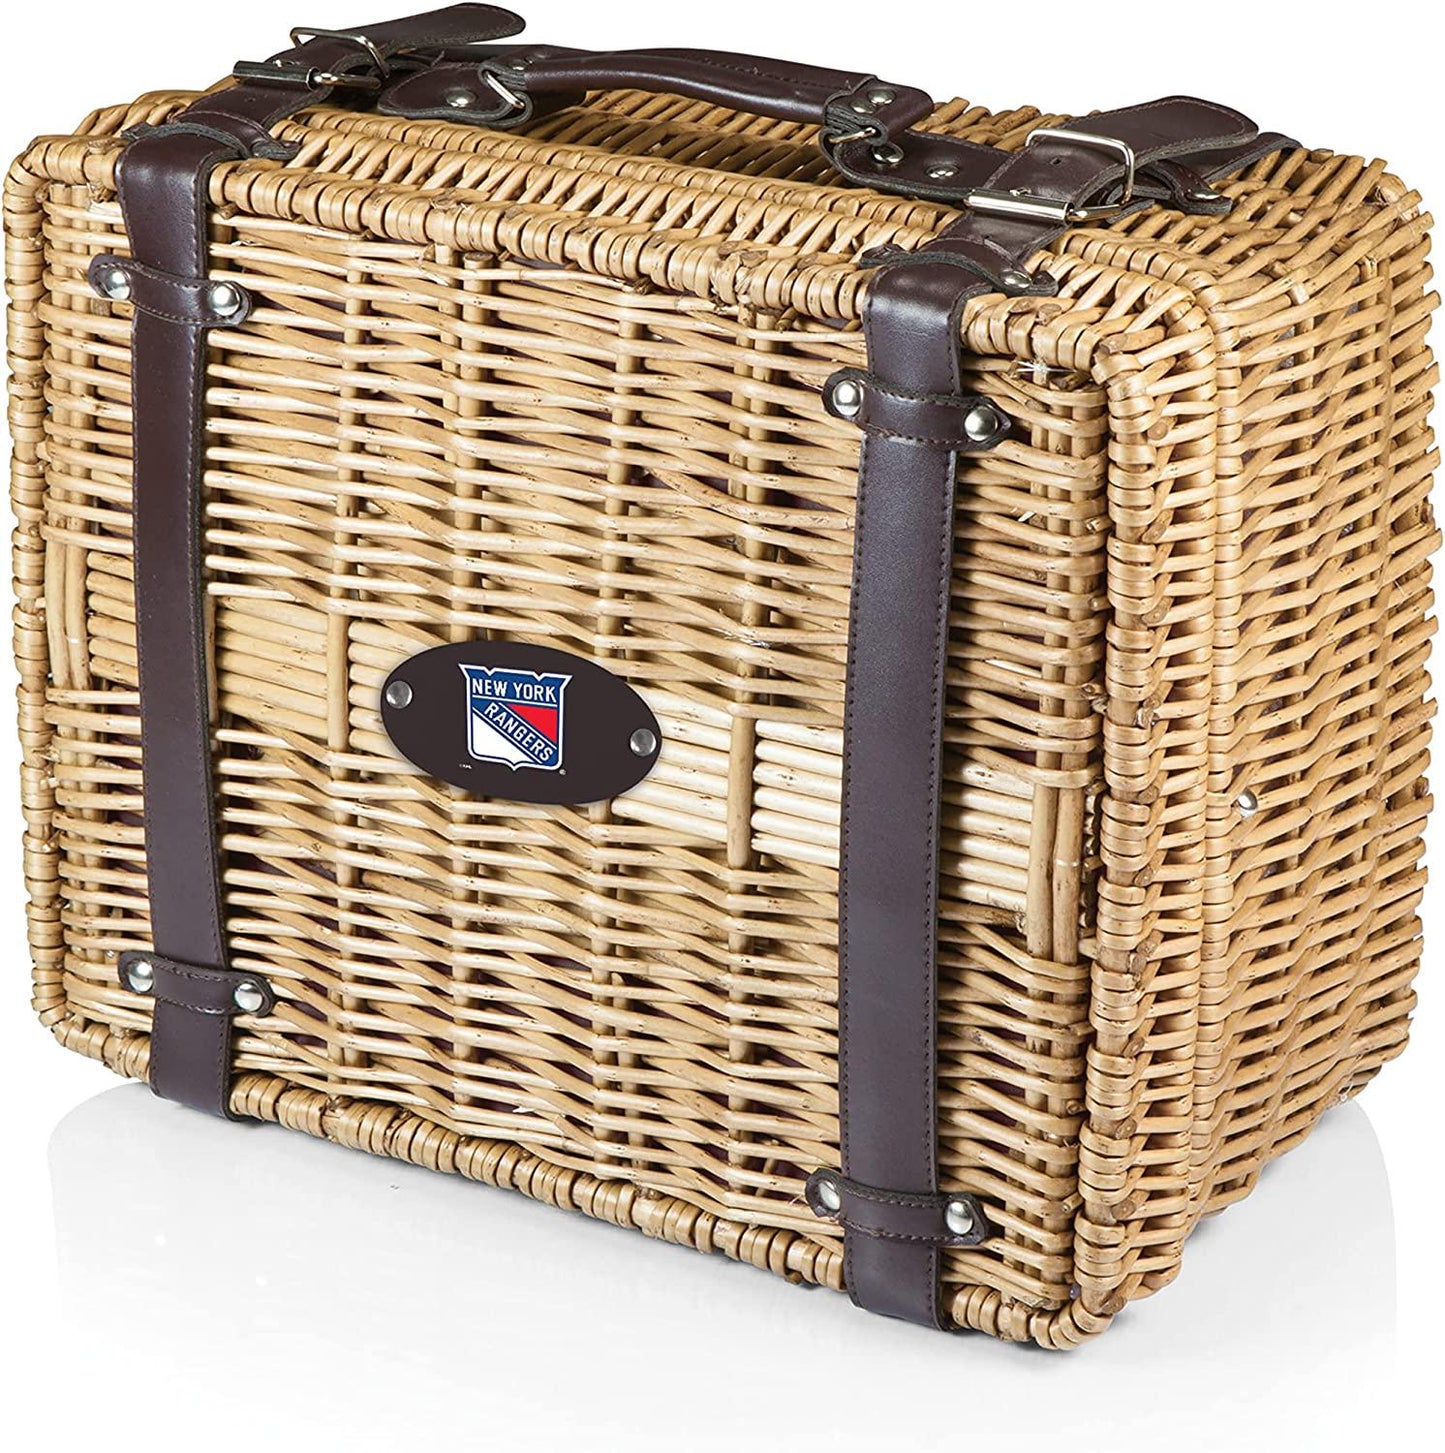 PICNIC TIME NHL Unisex-Adult NHL Champion Picnic Basket for 2, Large Wicker Picnic Set with Cutlery Service Kit